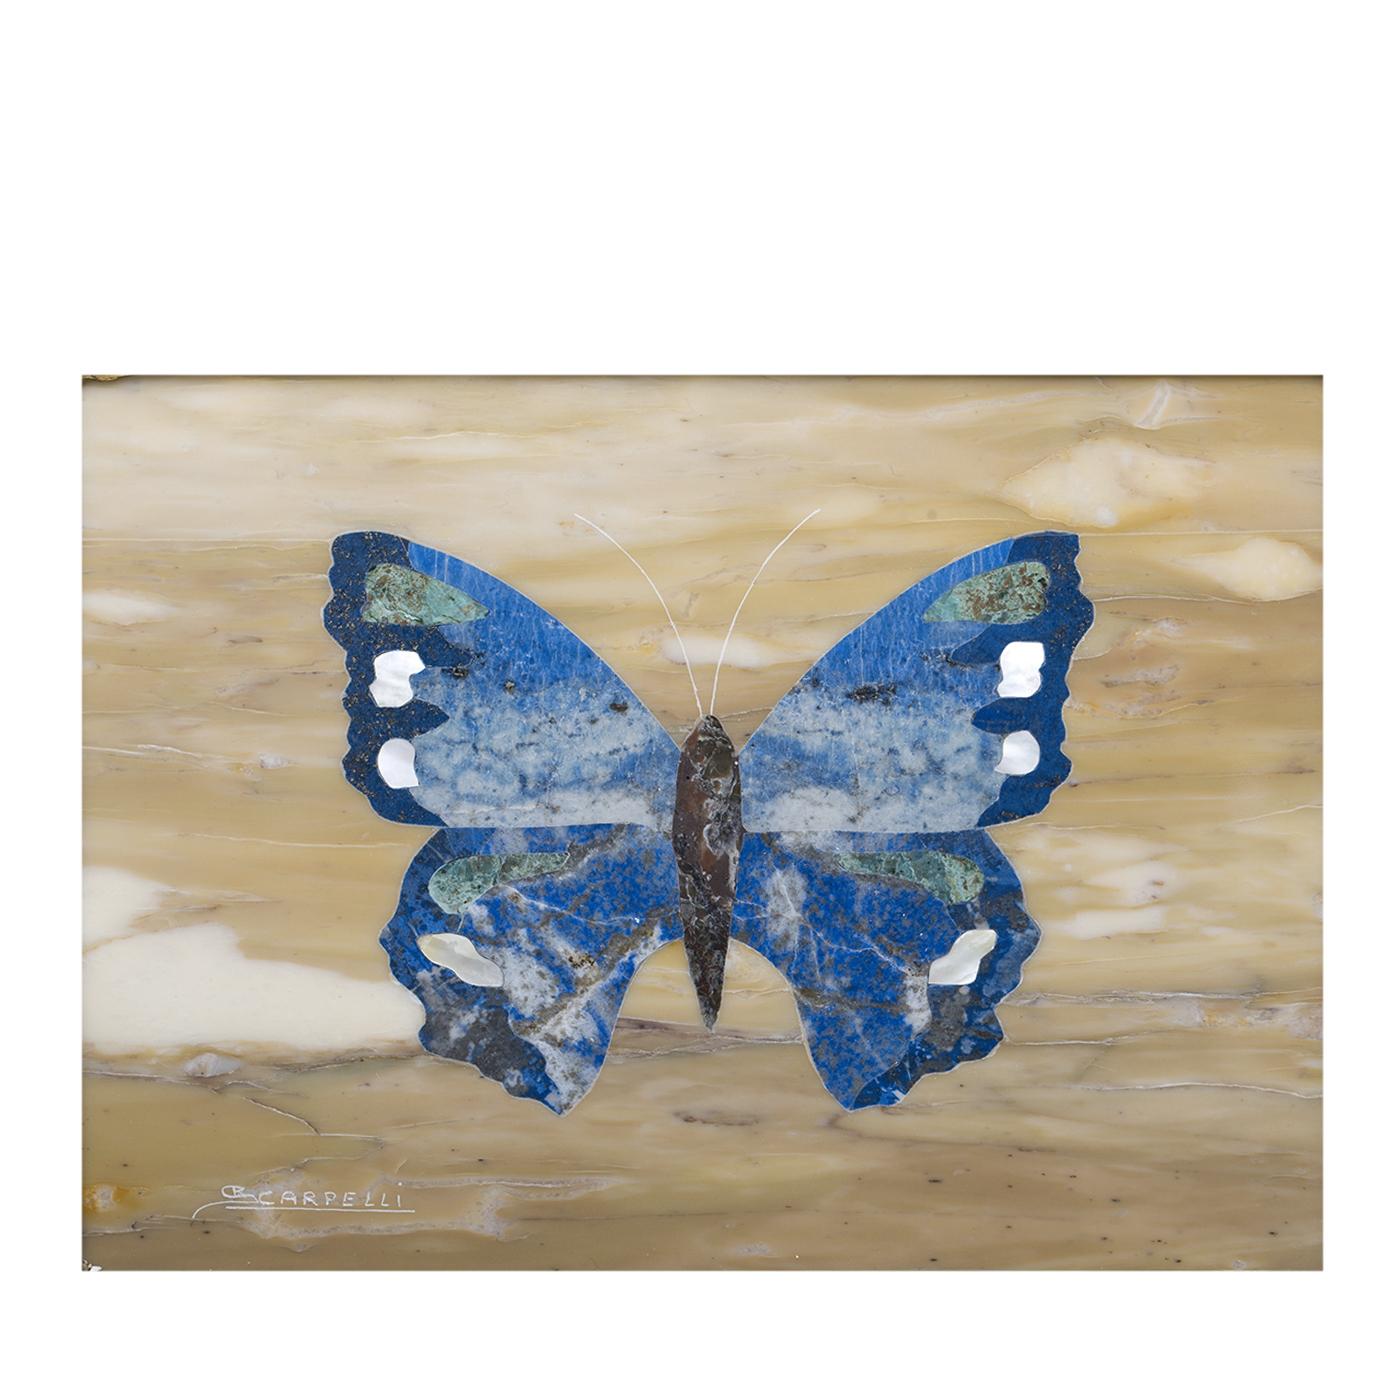 Lapis lazuli and semi-precious turquoise stones are gracefully set against light-colored rich marble to create a picture depicting a blue butterfly. Accentuated with mother of pearl, the butterfly is inlaid by Florentine master marble artists